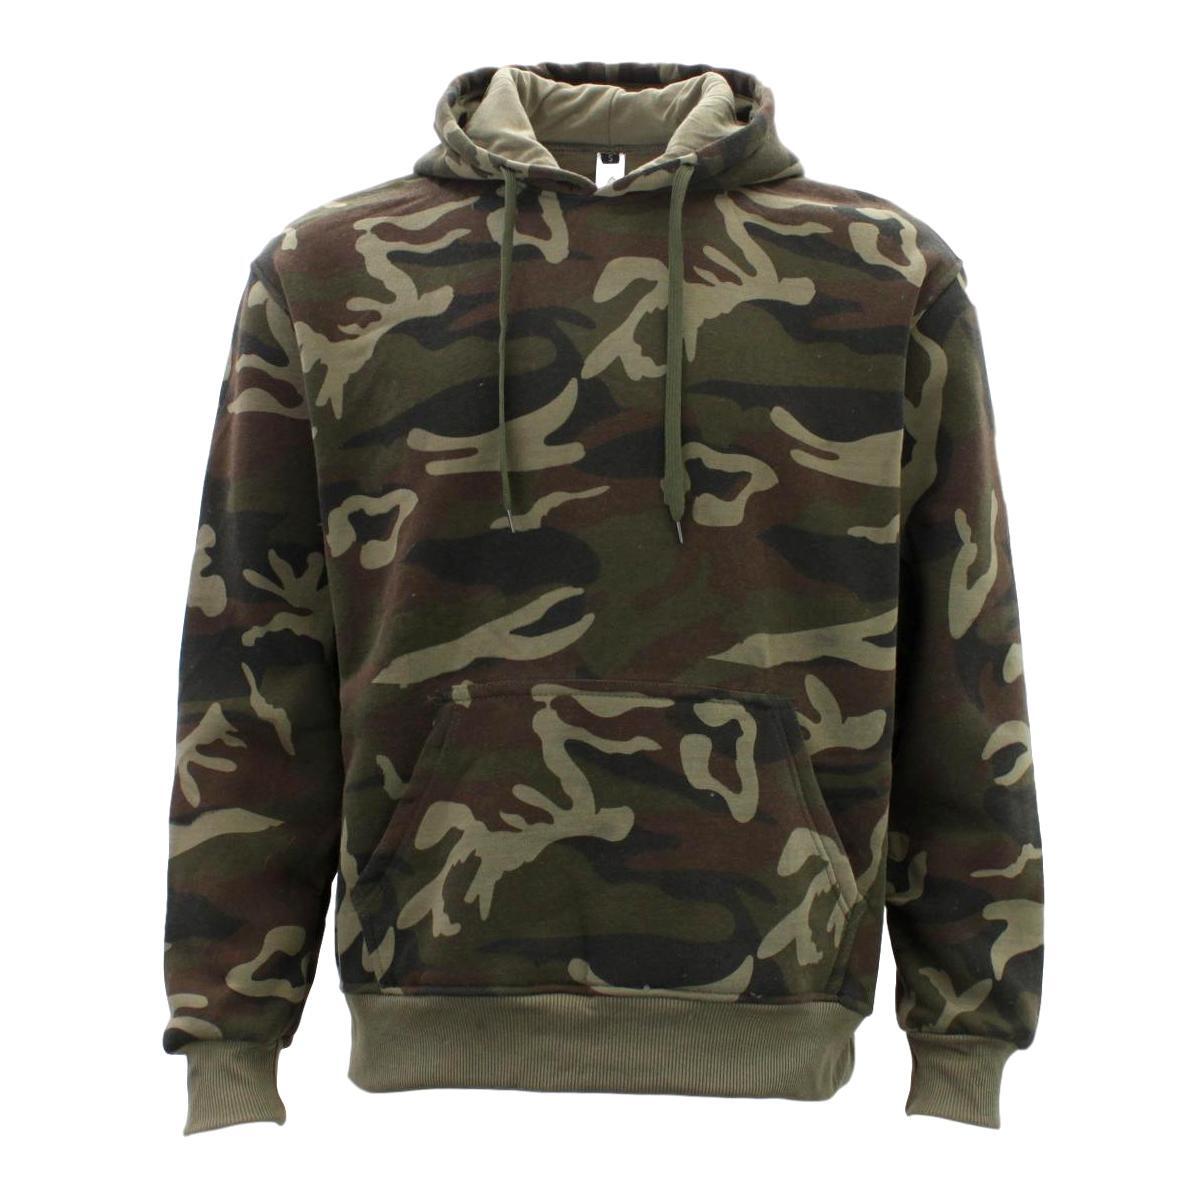 FIL Adult Men's Camo Pullover Hoodie Fleeced Camouflage Military Print Jacket